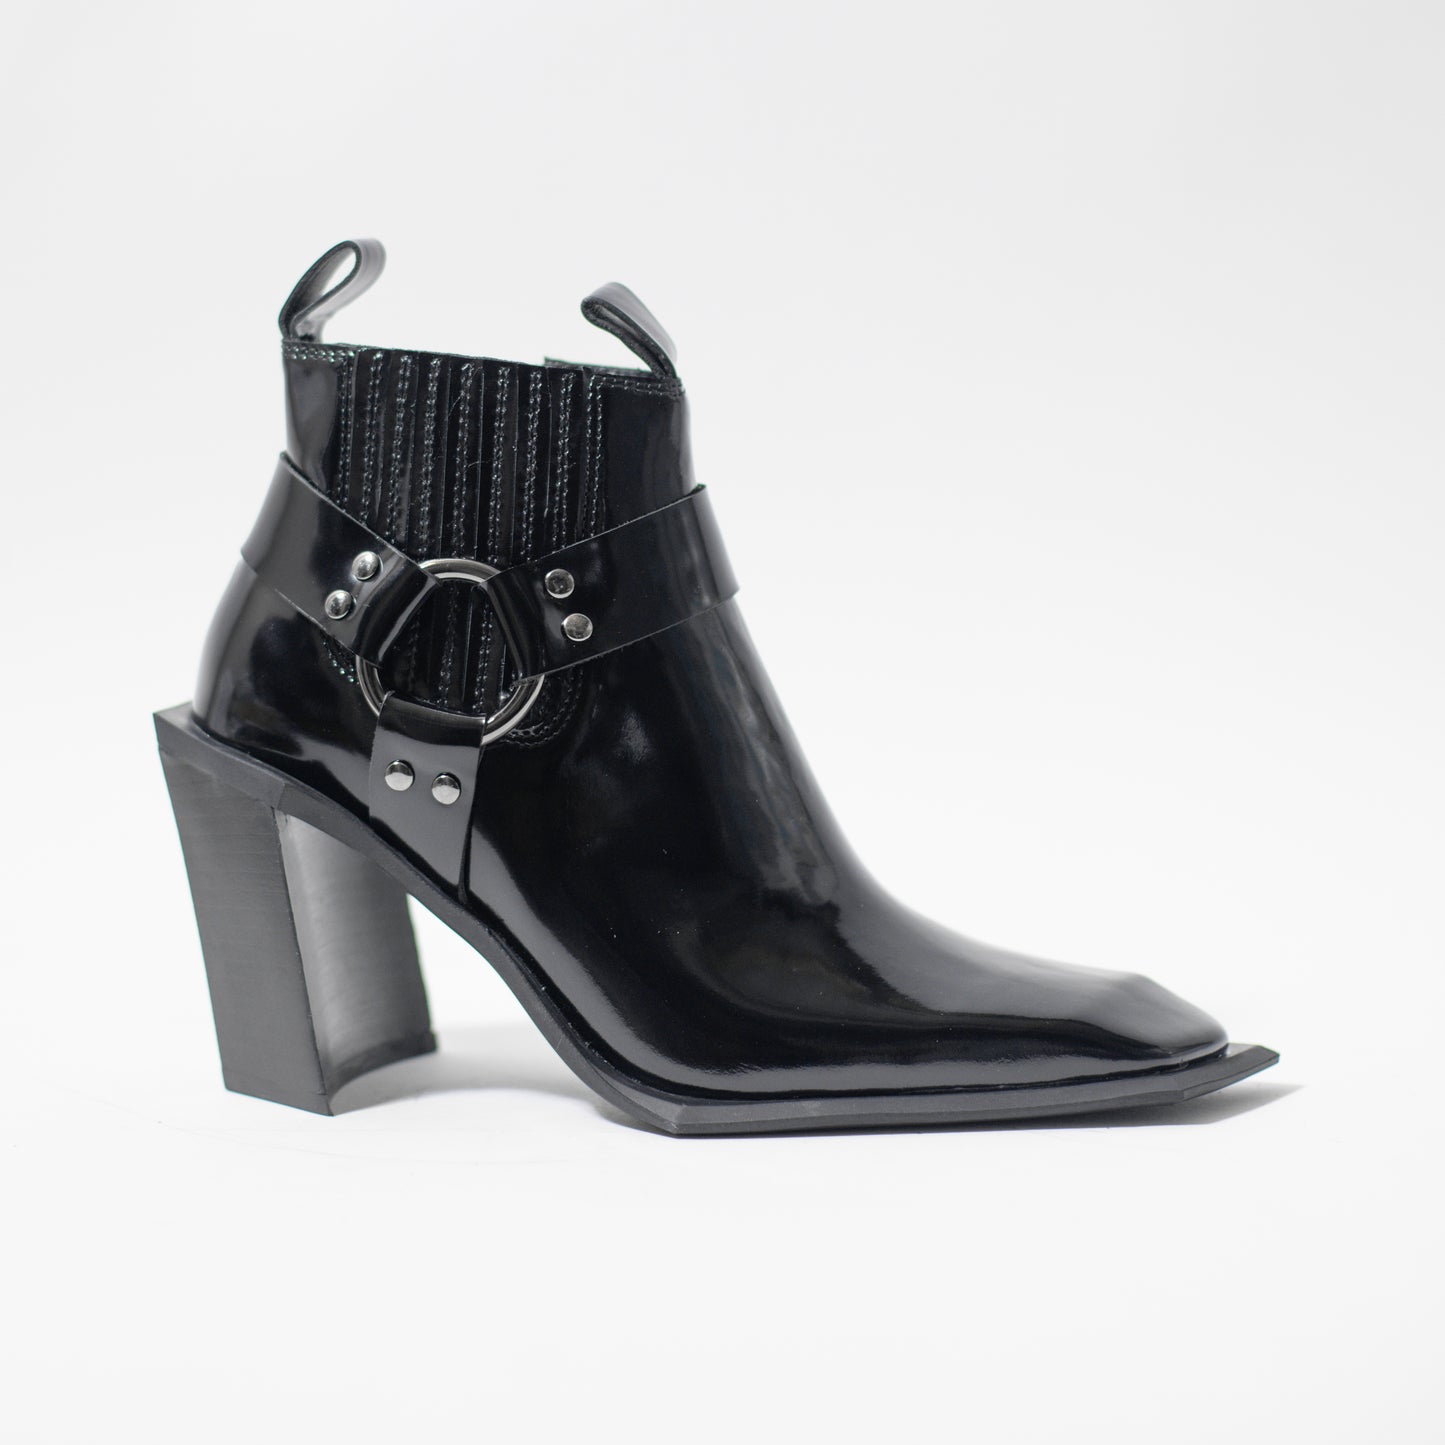 JEFFREY CAMPBELL BAD-GUY - HH HARNESS SHOOTIE